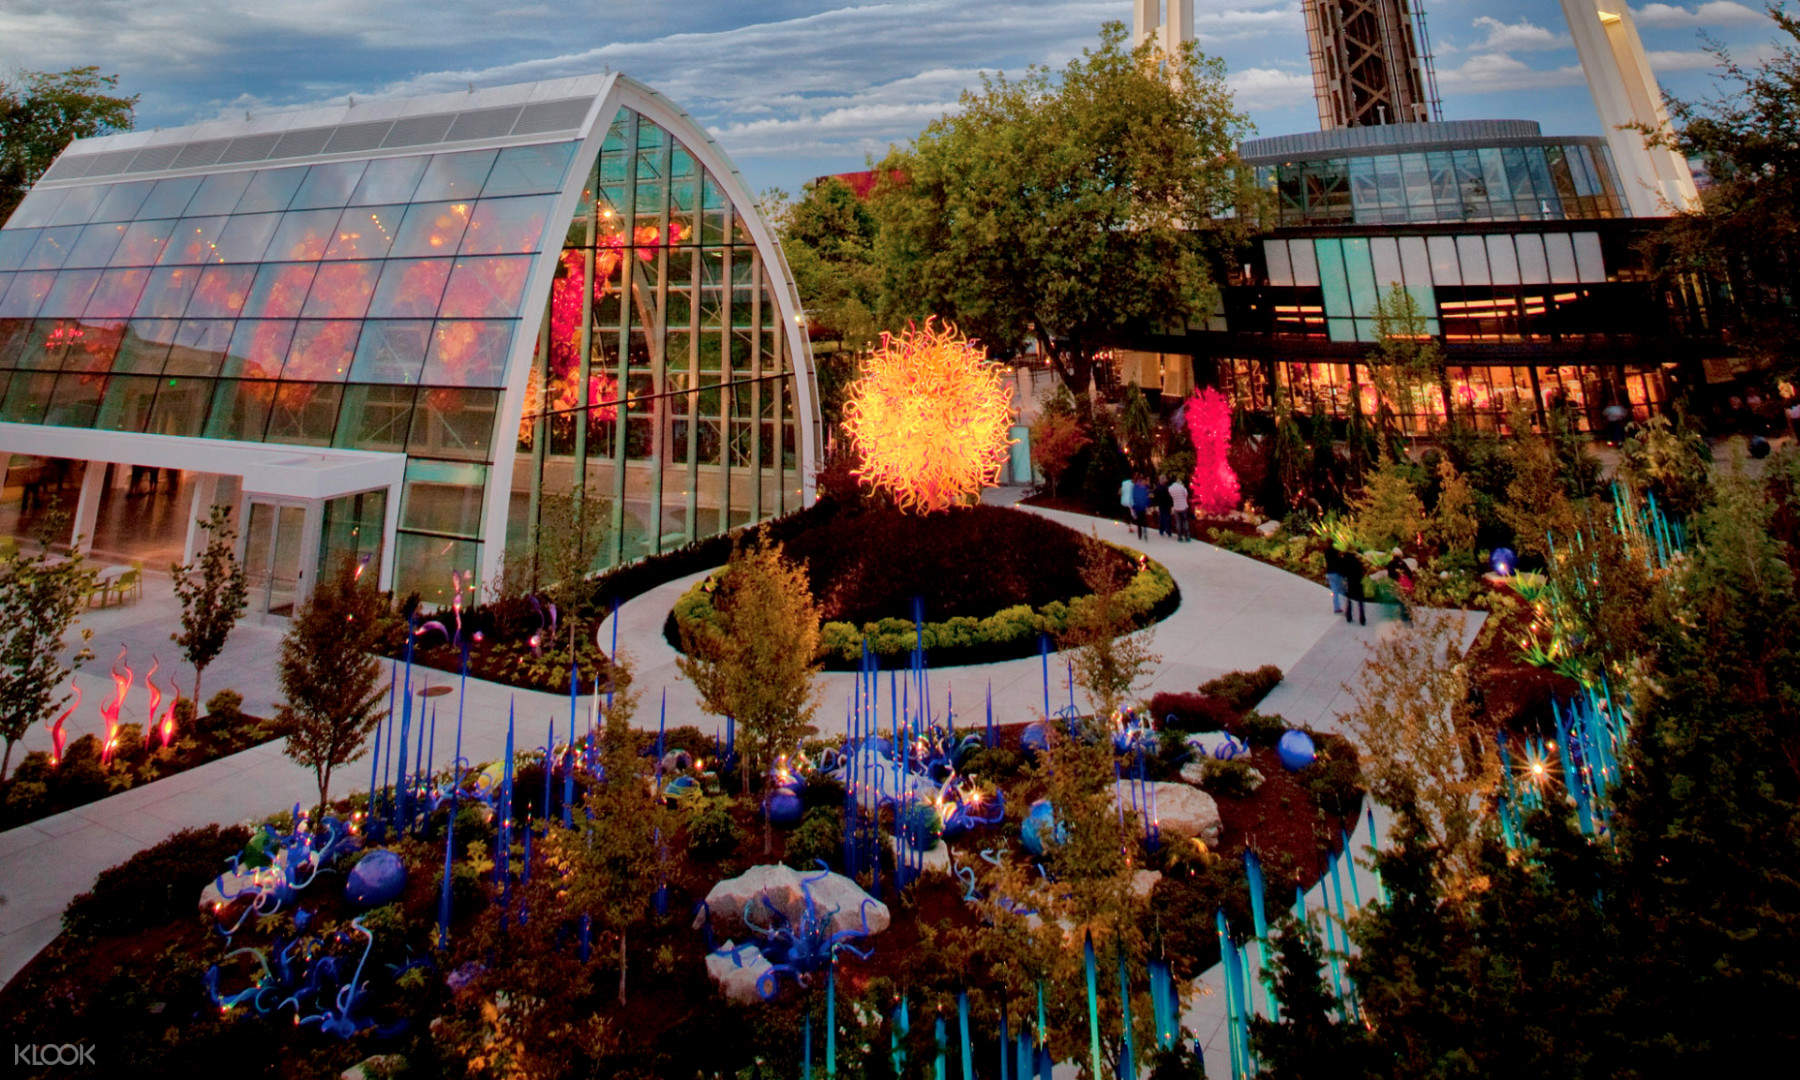 Chihuly Garden and Glass of Seattle